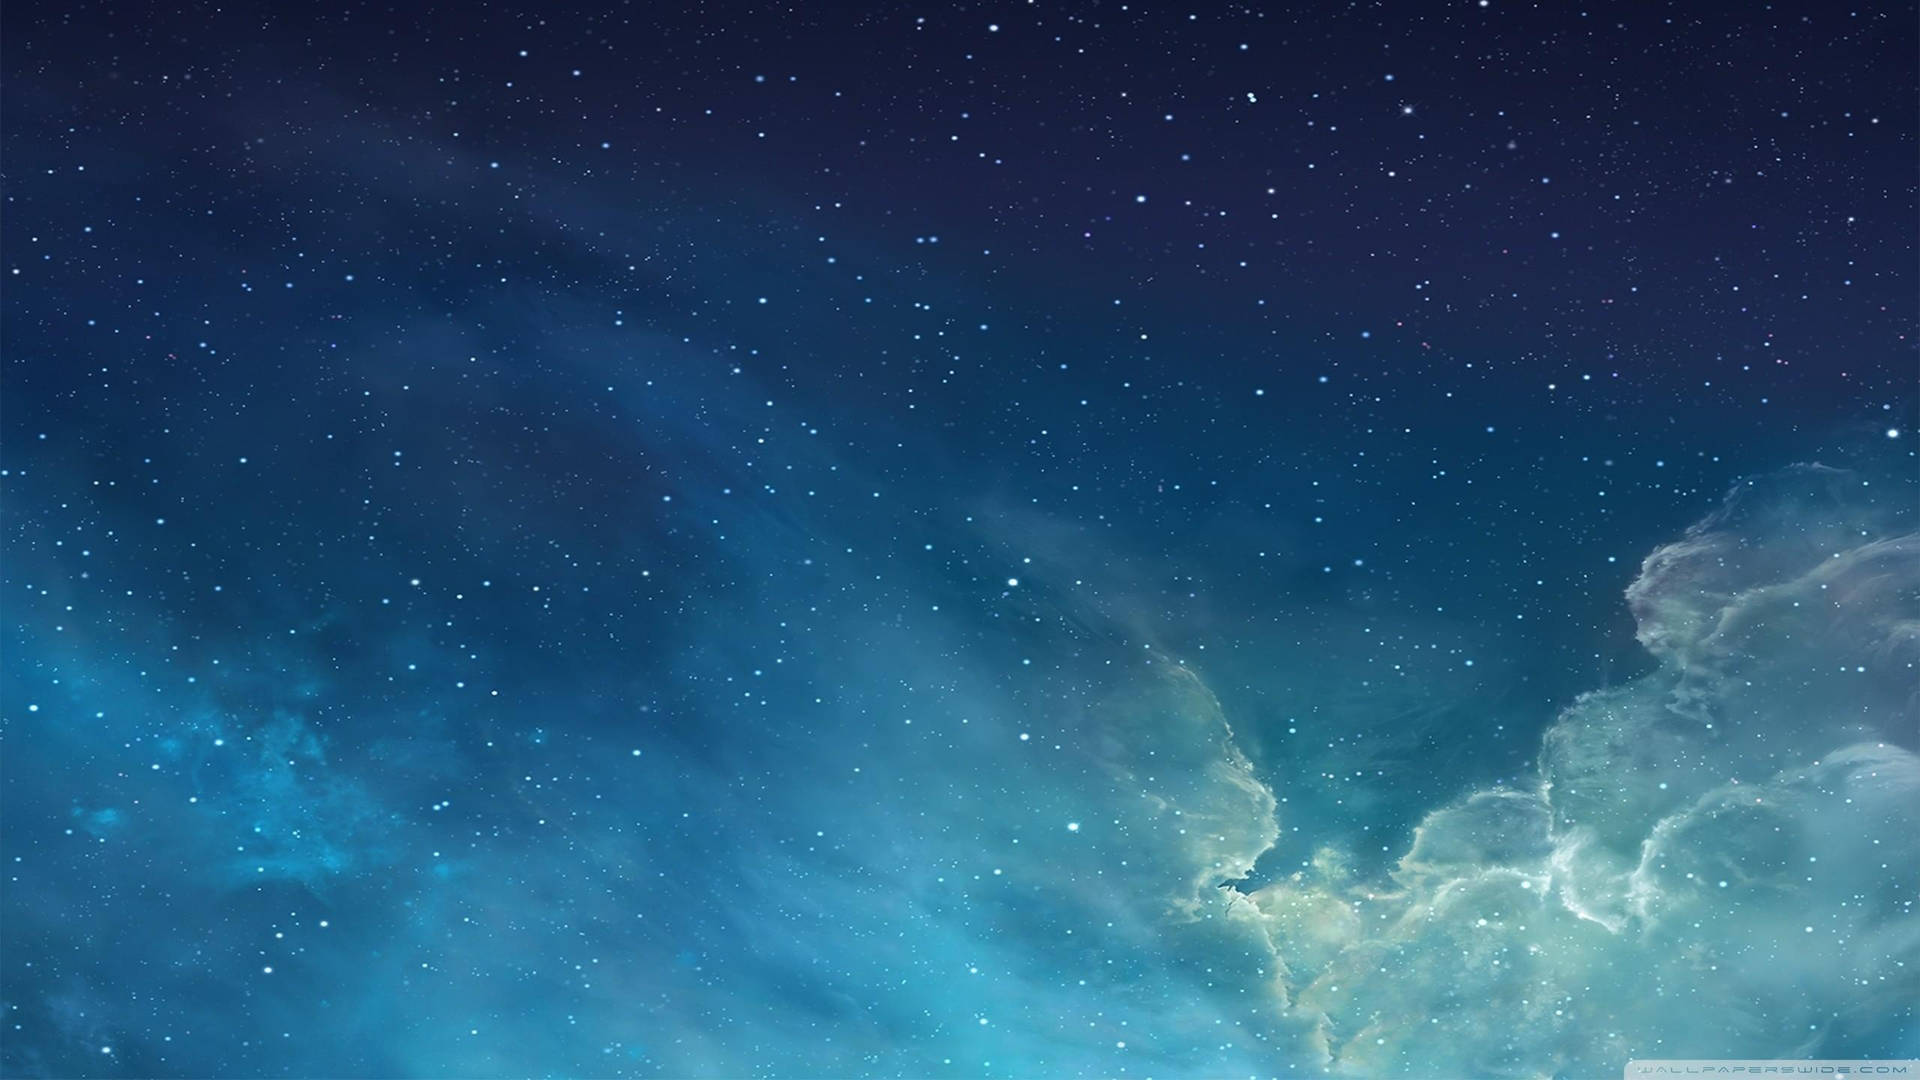 Download Aesthetic Blue Stars And Clouds Wallpaper 